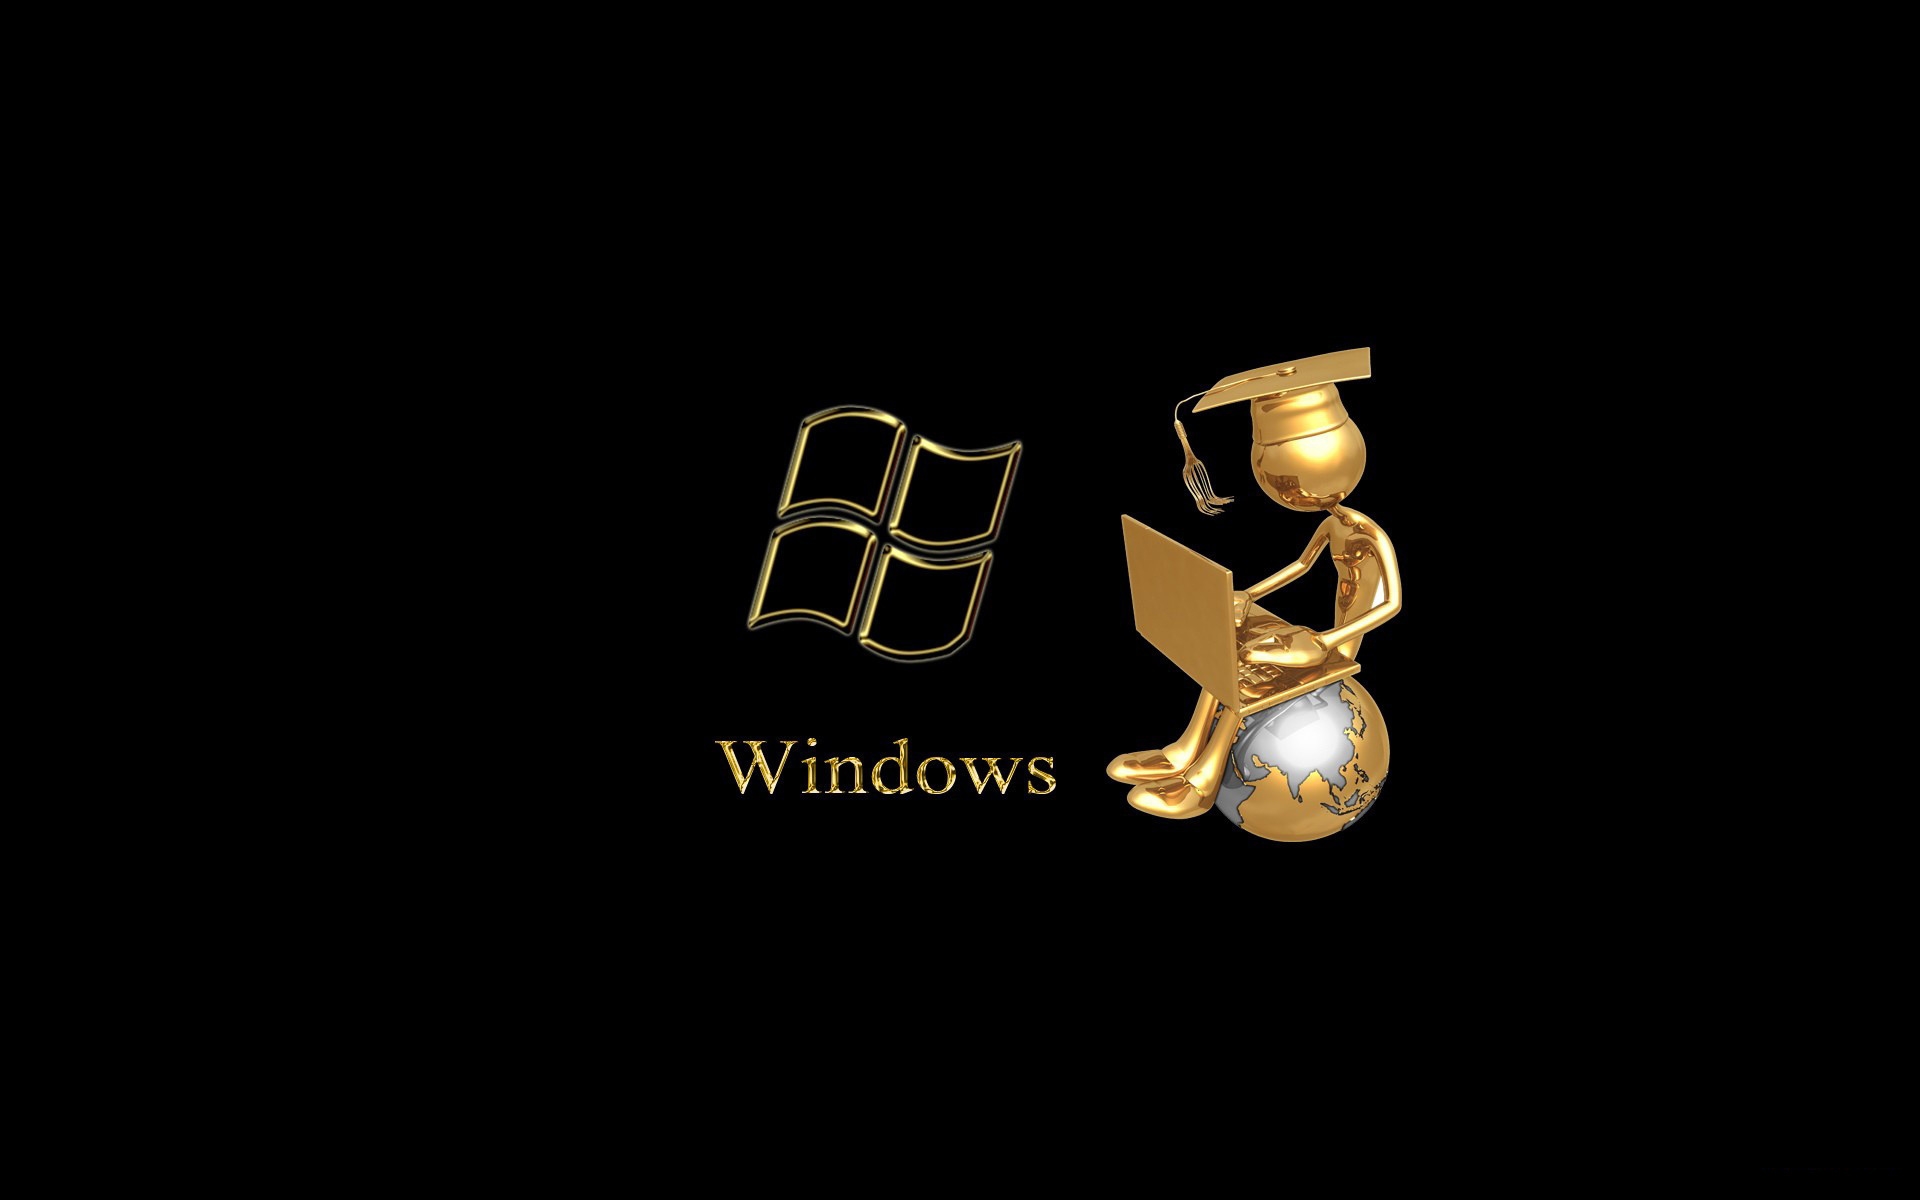 Windows Gold for 1920 x 1200 widescreen resolution